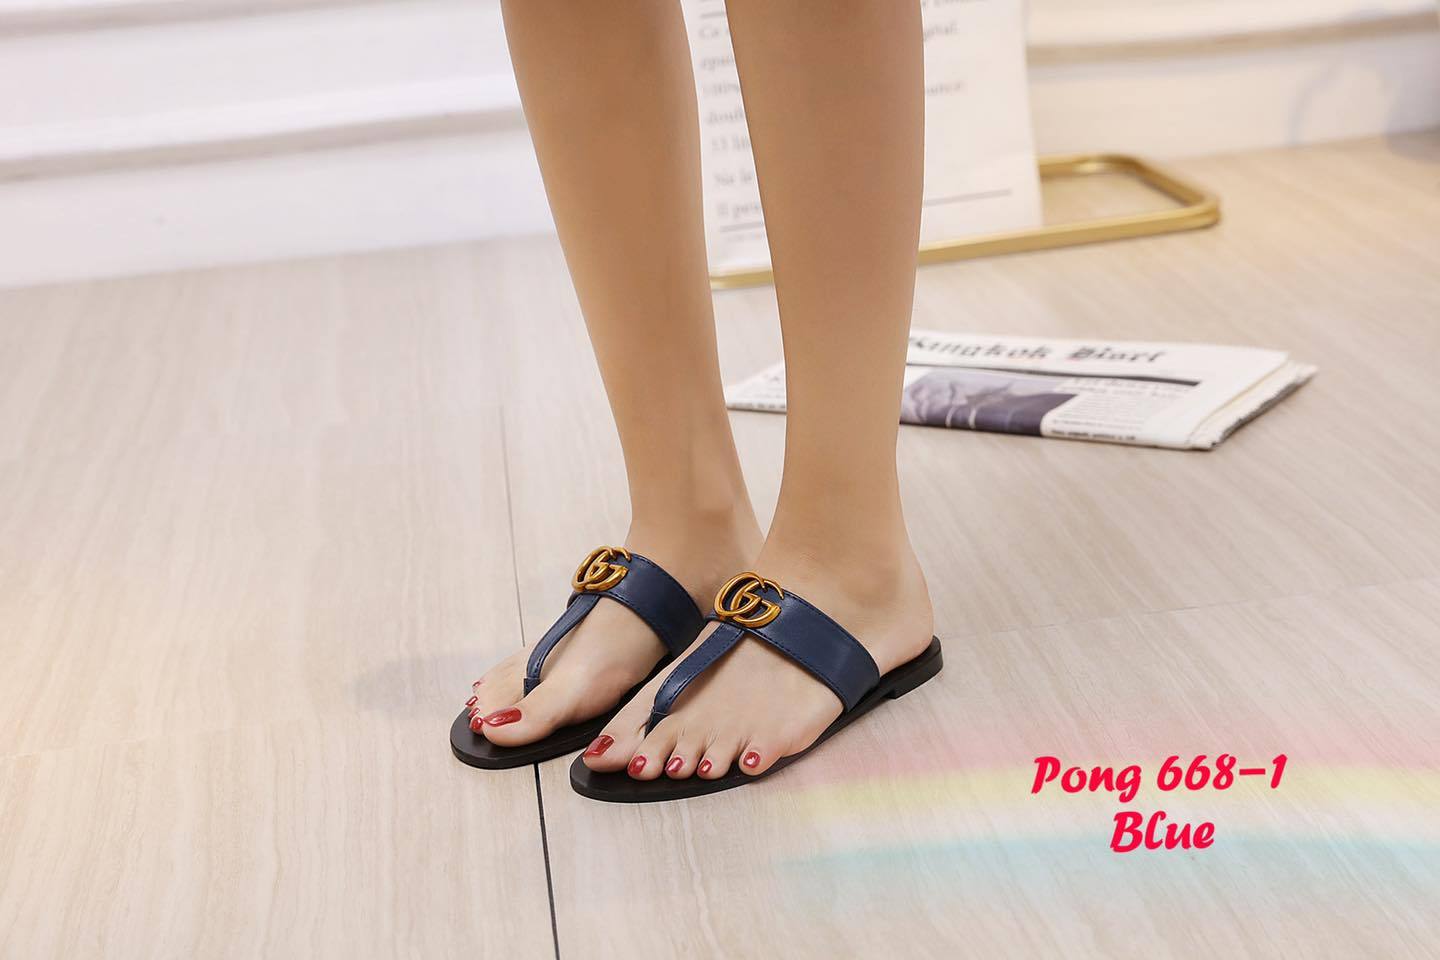 GG668-1 Double G Leather Thong Sandals Shoes StyleMoto 